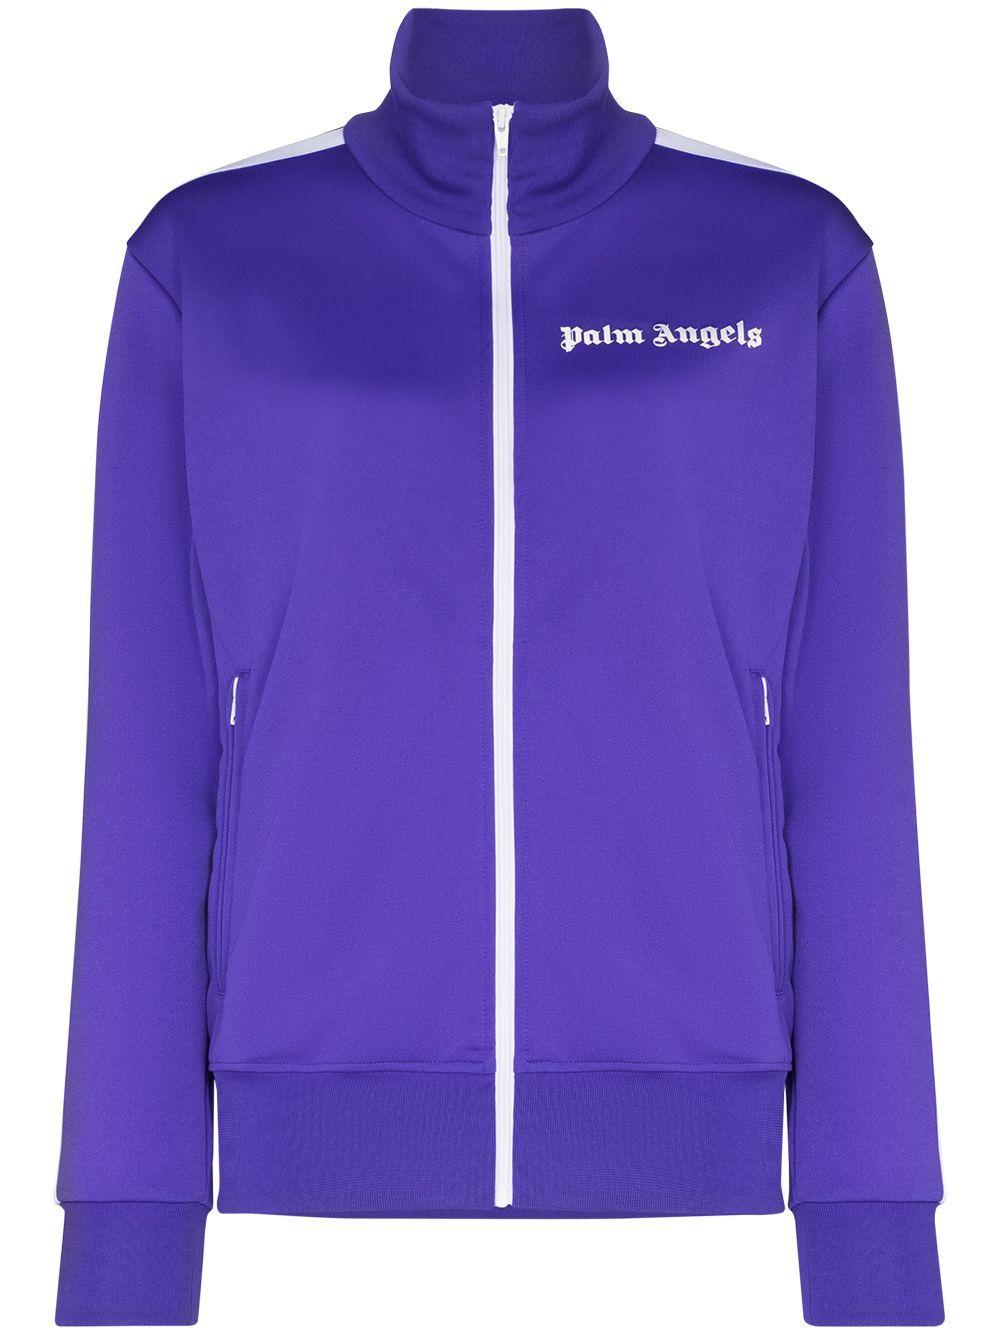 Palm Angels Synthetic Polyester Sweatshirt in Purple for Men - Lyst